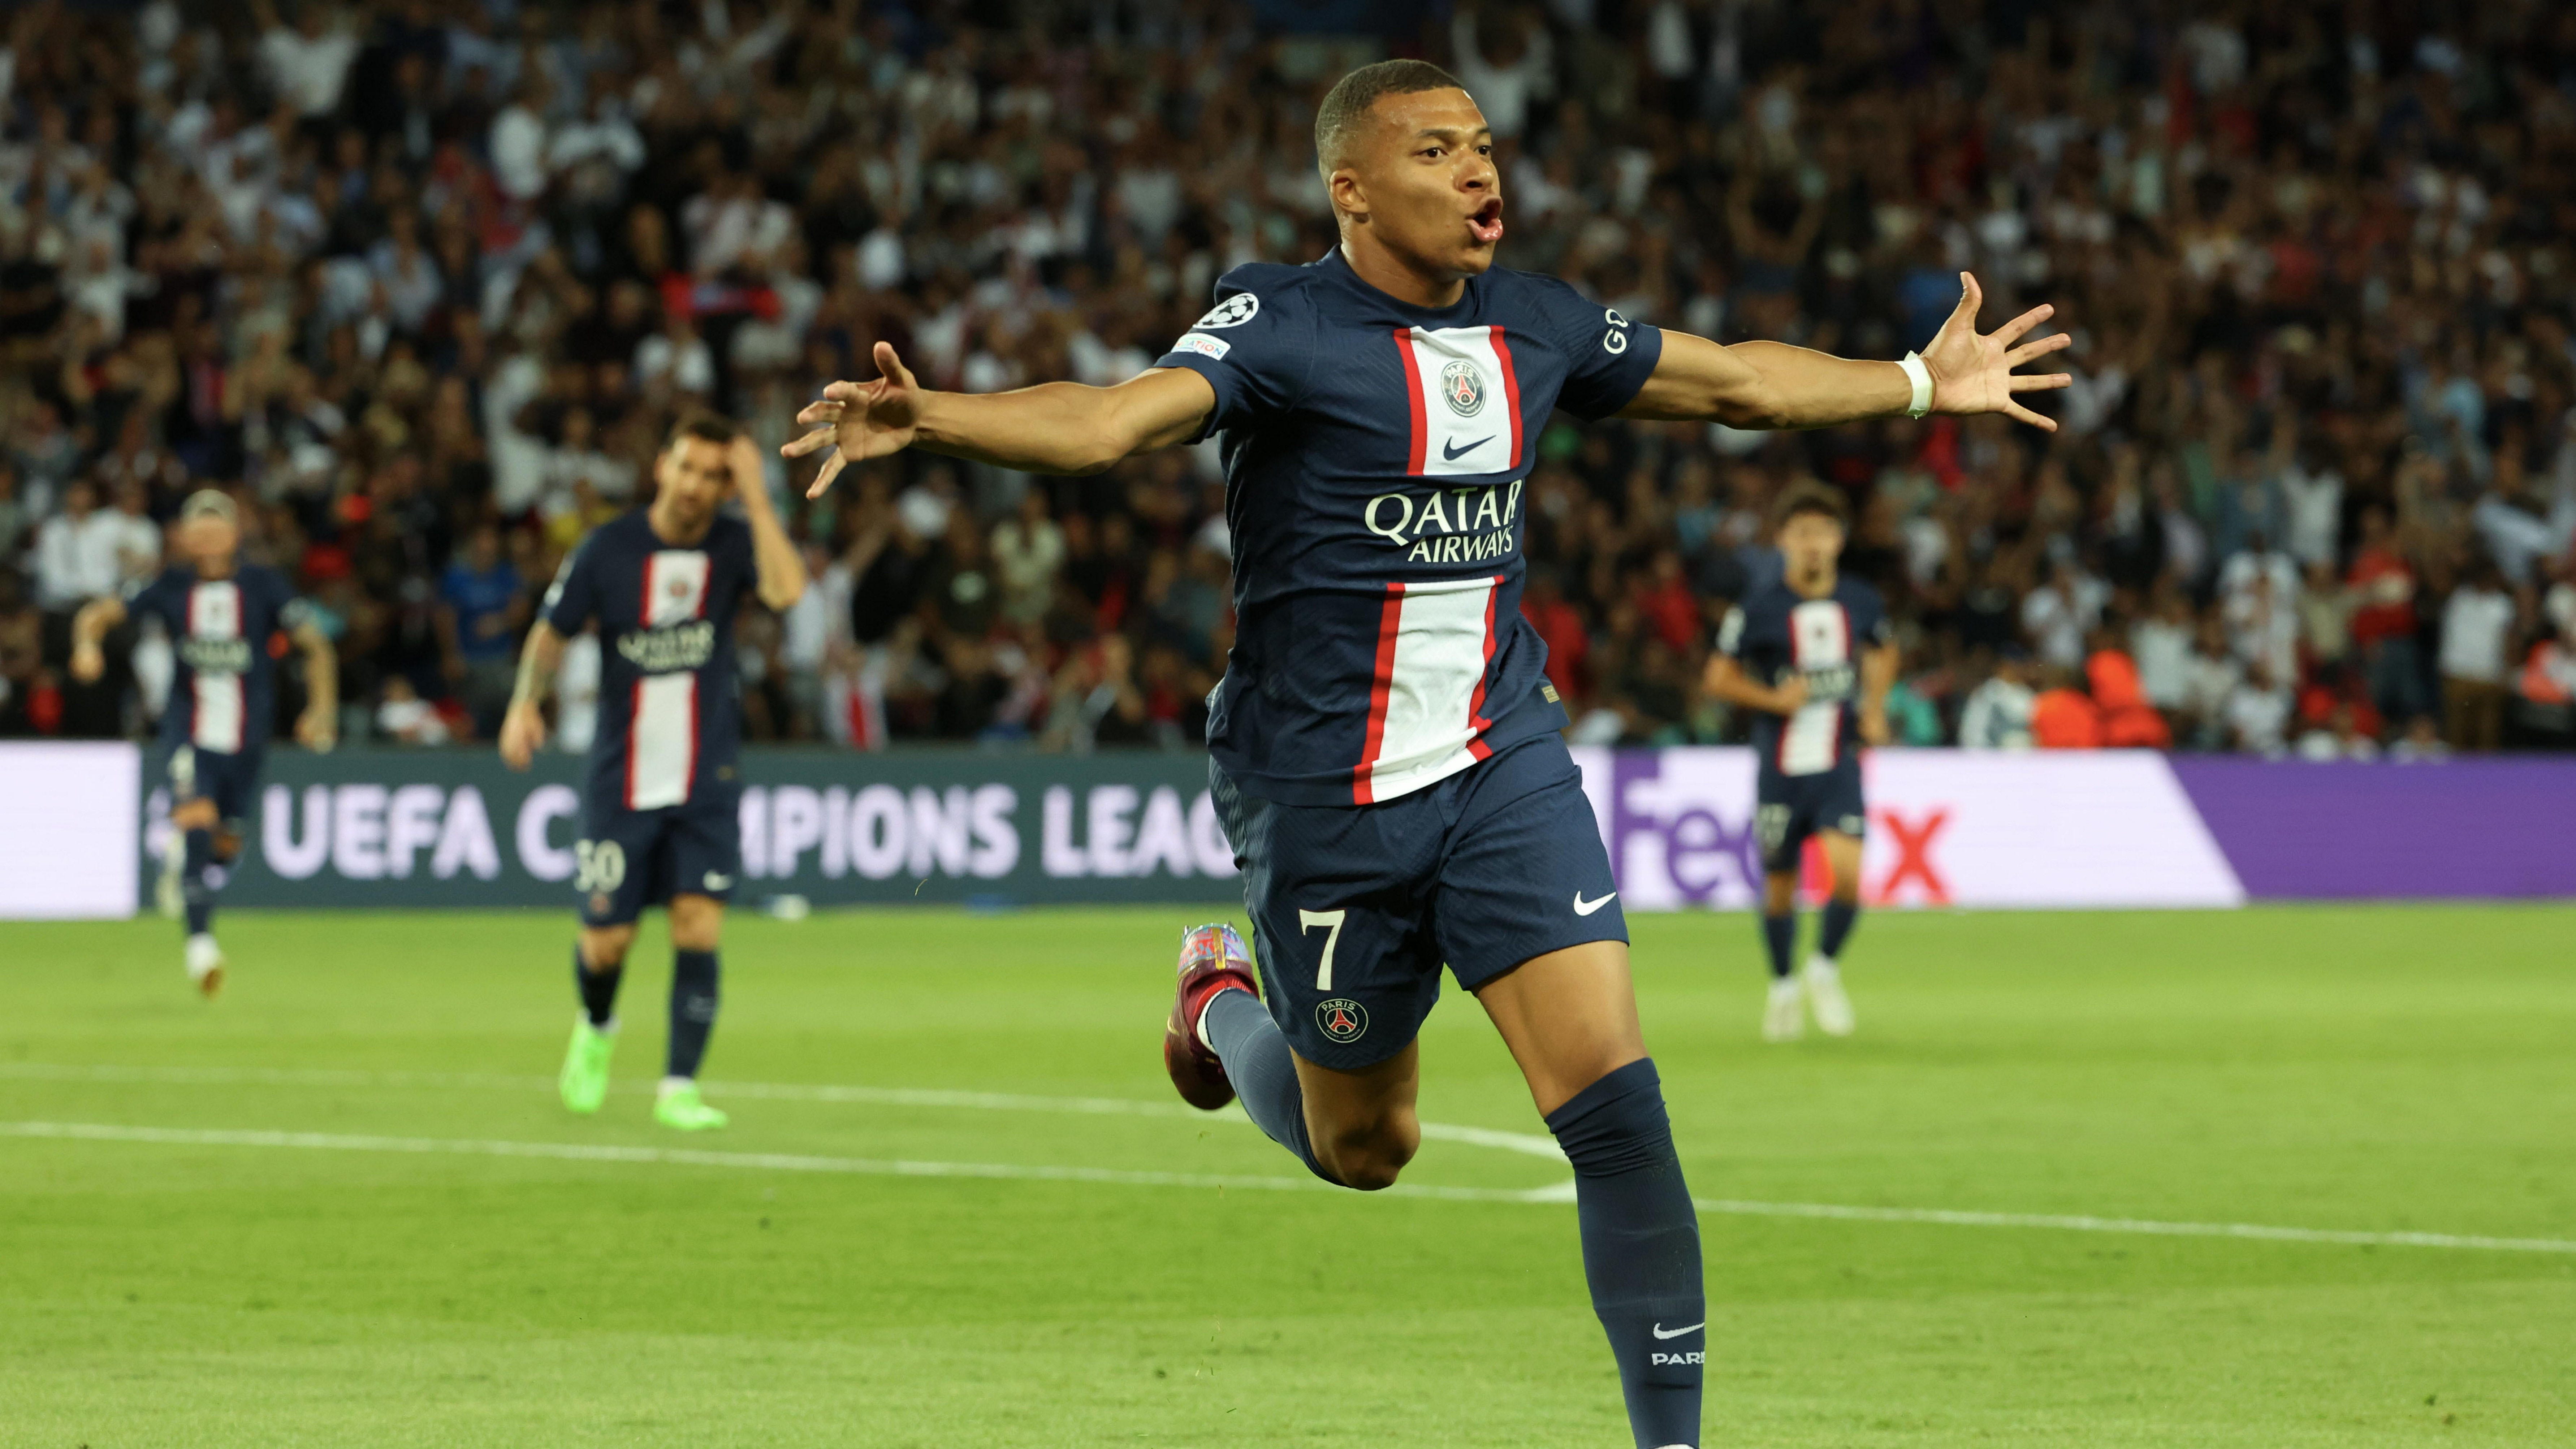 Kylian Mbappé shines in Paris Saint-Germain’s victory over Juventus in first UEFA Champions league match